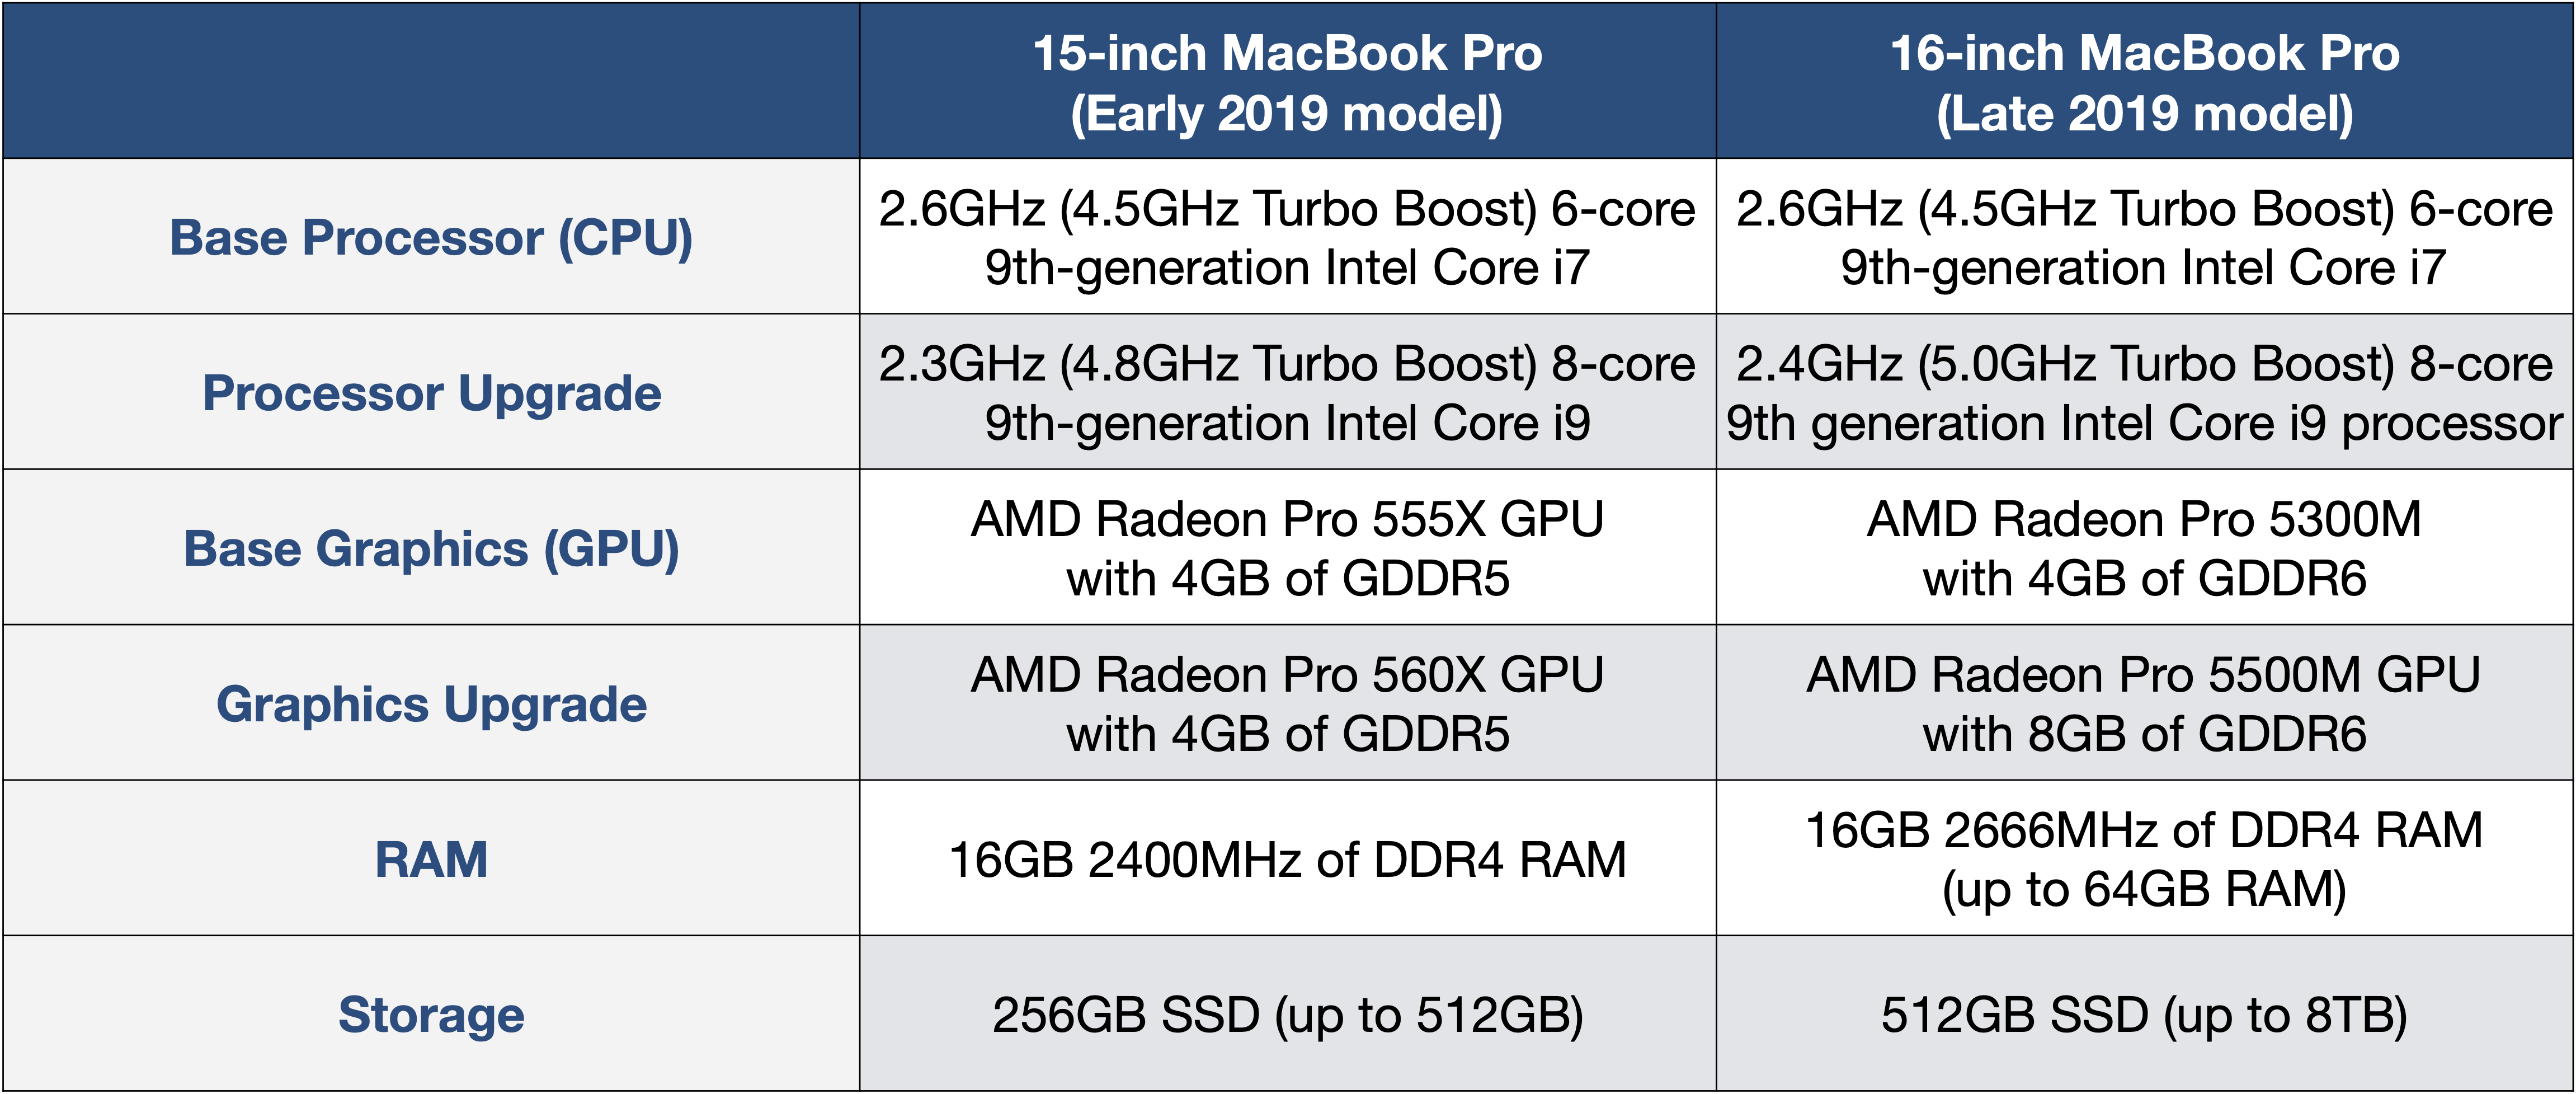 going rate for a 16 gb mid 2014 mac pro retina